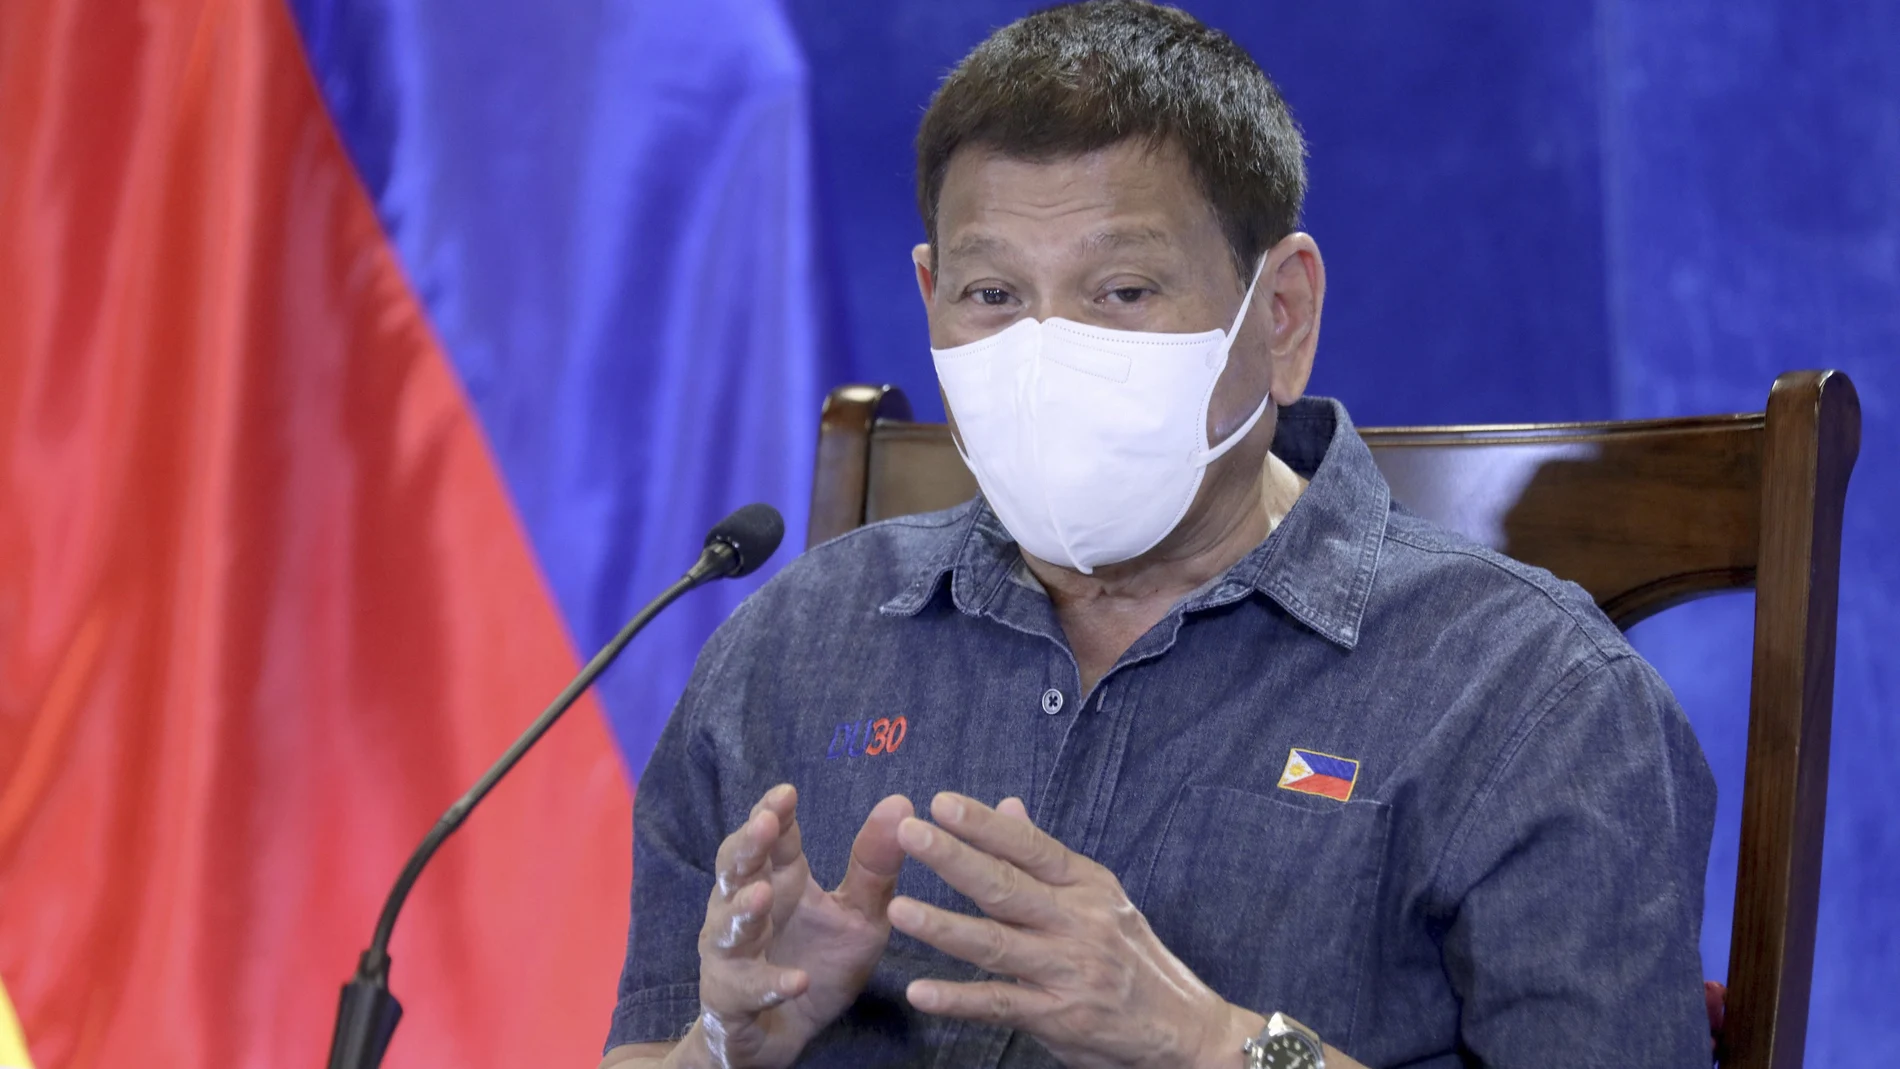 In this photo provided by the Malacanang Presidential Photographers Division, Philippine President Rodrigo Duterte gestures as he meets members of the Inter-Agency Task Force on the Emerging Infectious Diseases at the Malacanang presidential palace in Manila, Philippines, Monday, June 21, 2021. The Philippine president has threatened to order the arrest of Filipinos who refuse COVID-19 vaccination and told them to leave the country for hard-hit countries like India and the United States if they would not cooperate with massive efforts to end the pandemic. (Simeon Celi/Malacanang Presidential Photographers Division via AP)